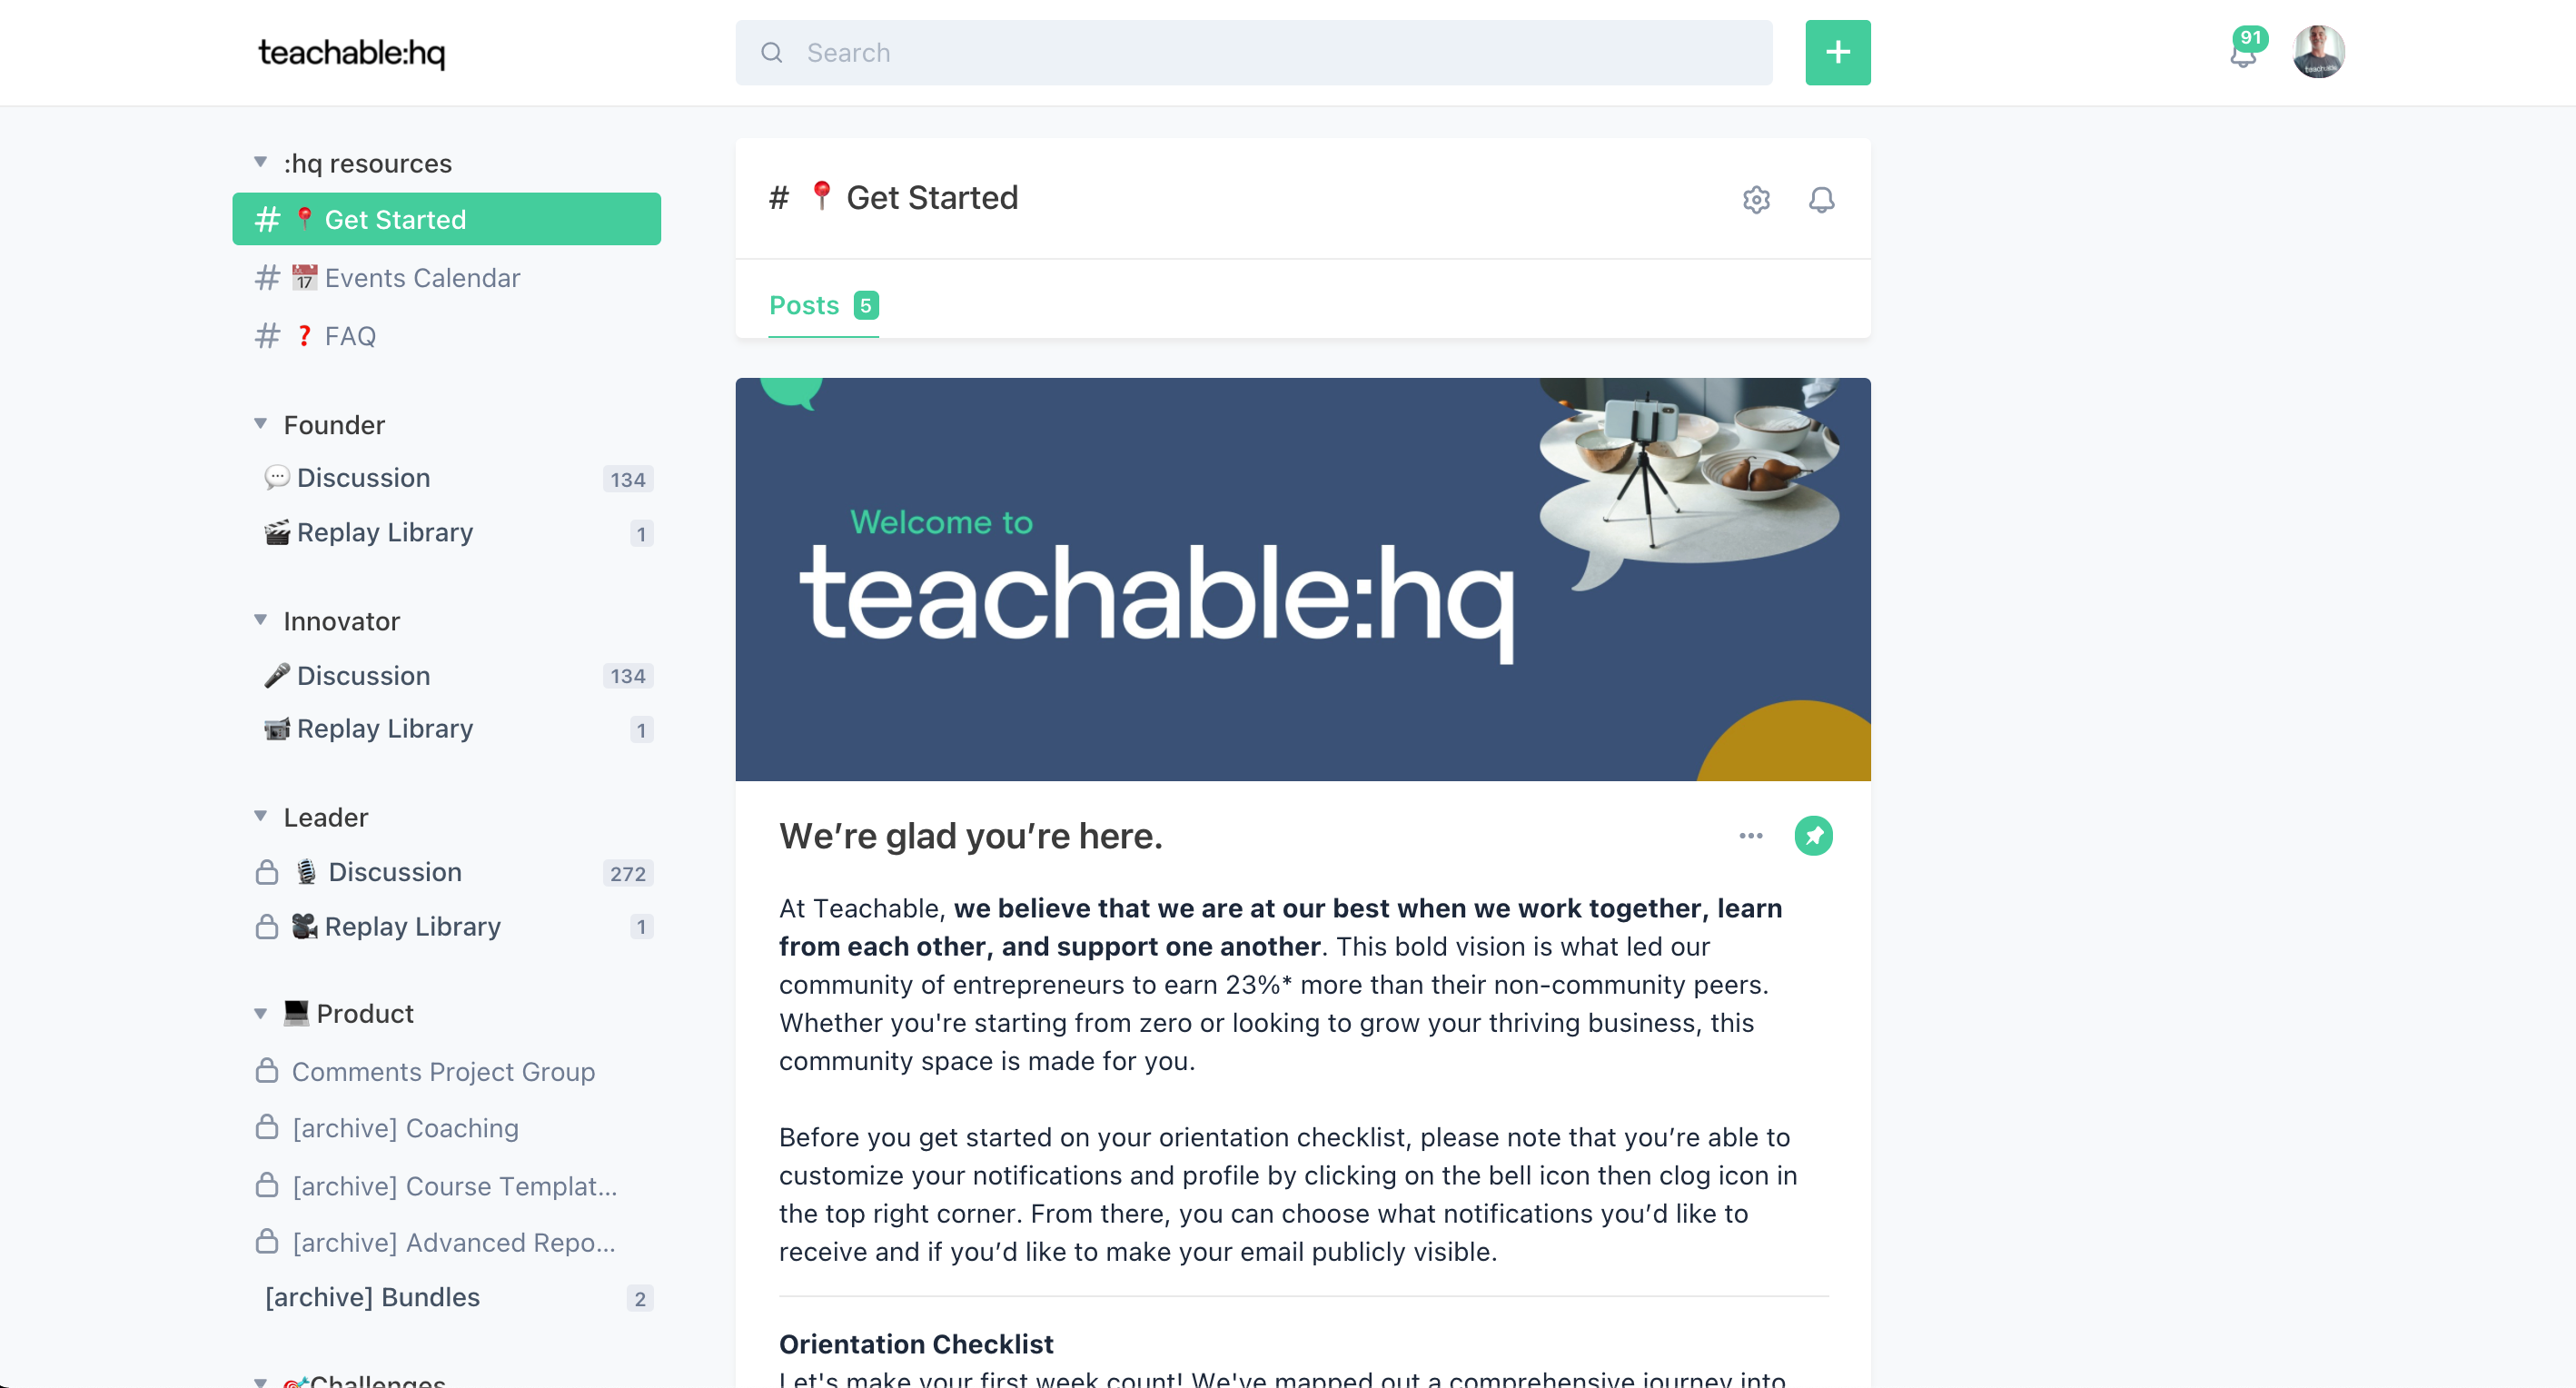 The screen shows the homepage of TEACHABLE HQ. There is a welcome message on the main screen, and the left side navigation menu has several tab options such as DISCUSSION, RESOURCES, FAQ, etc.